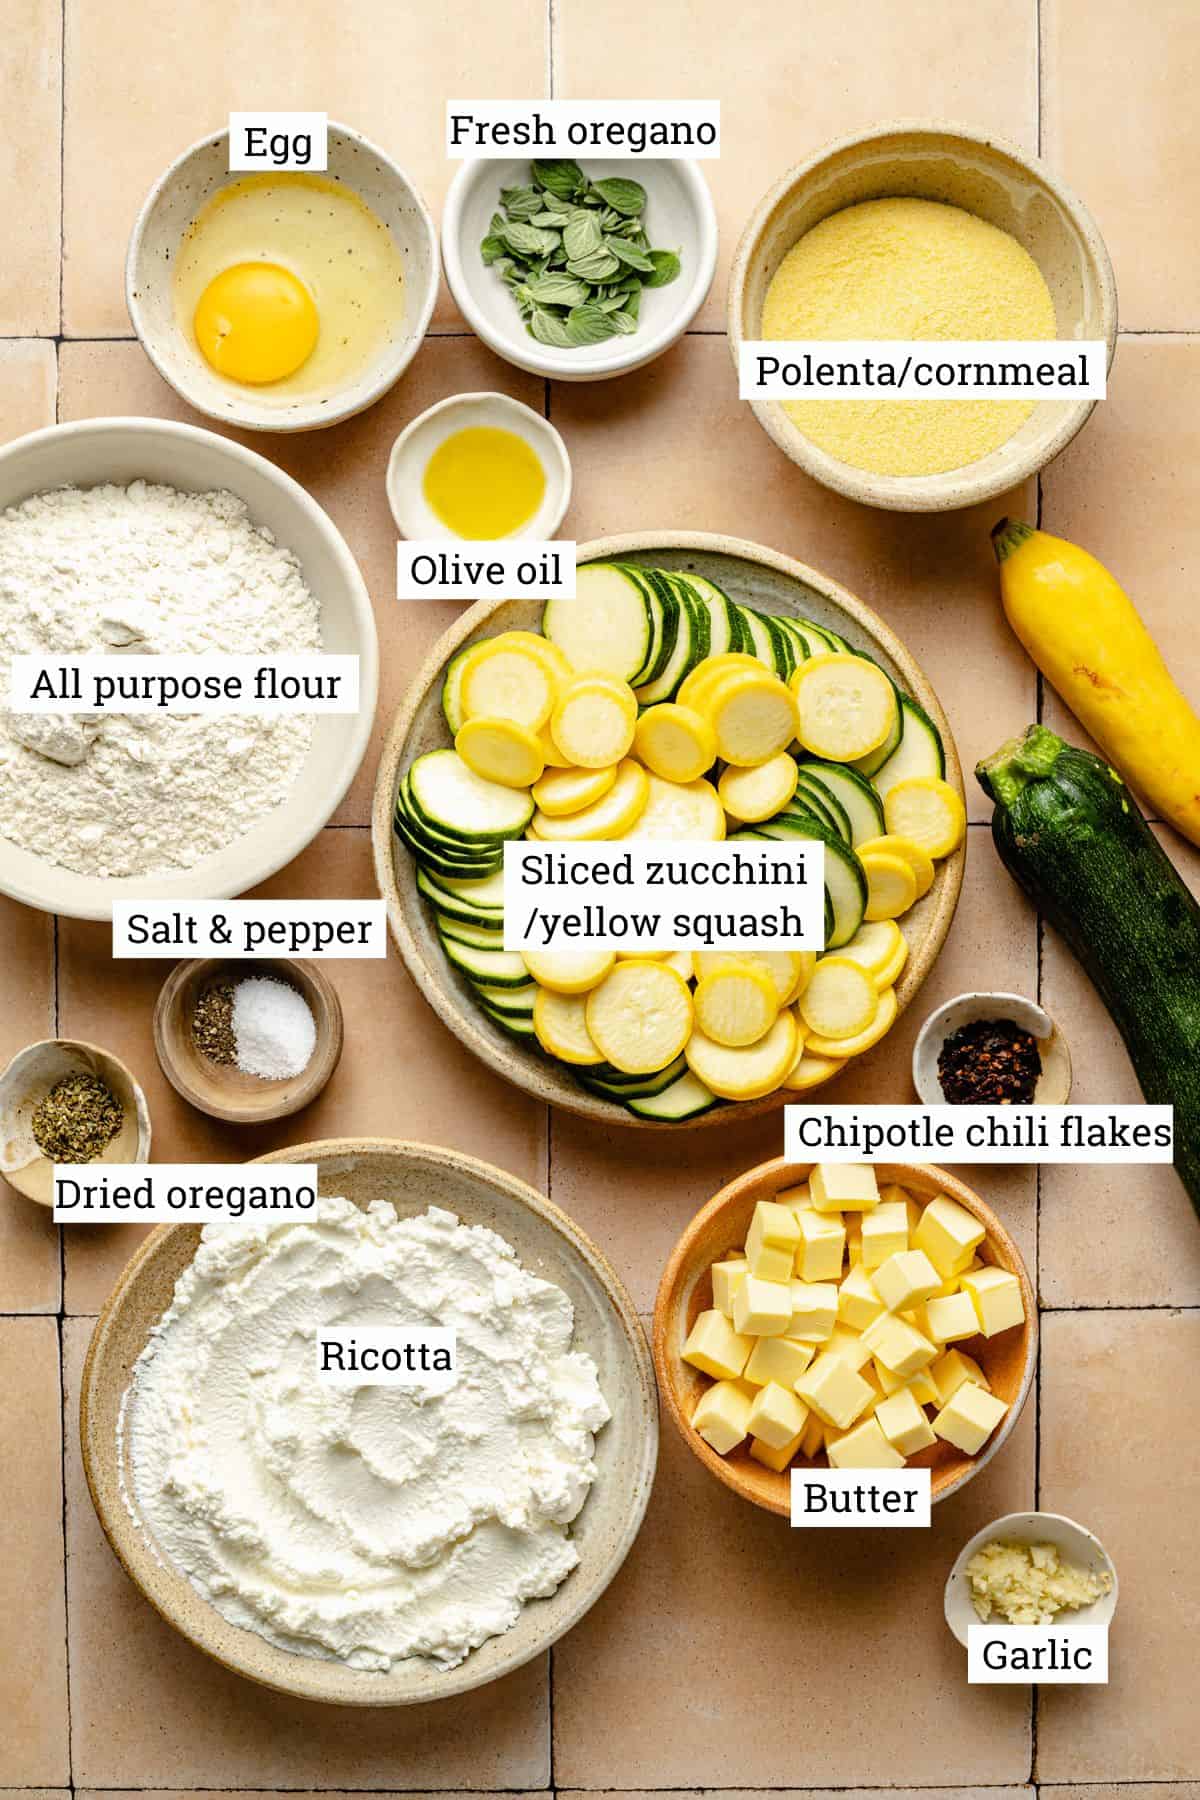 Ingredients for galette in various bowls labelled.